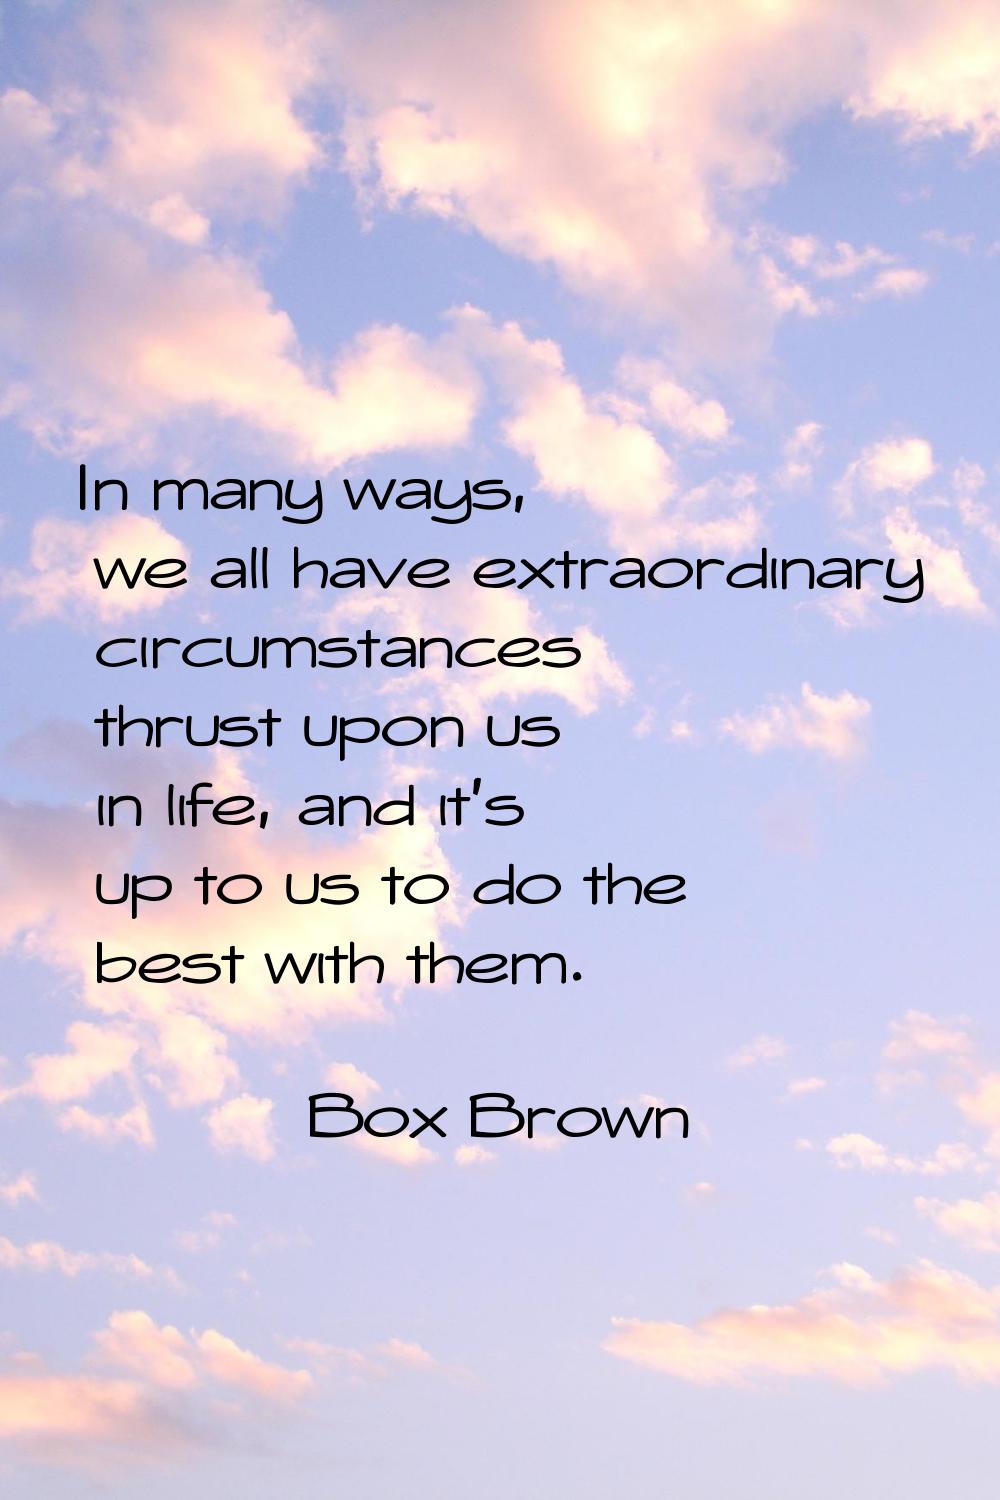 In many ways, we all have extraordinary circumstances thrust upon us in life, and it's up to us to 